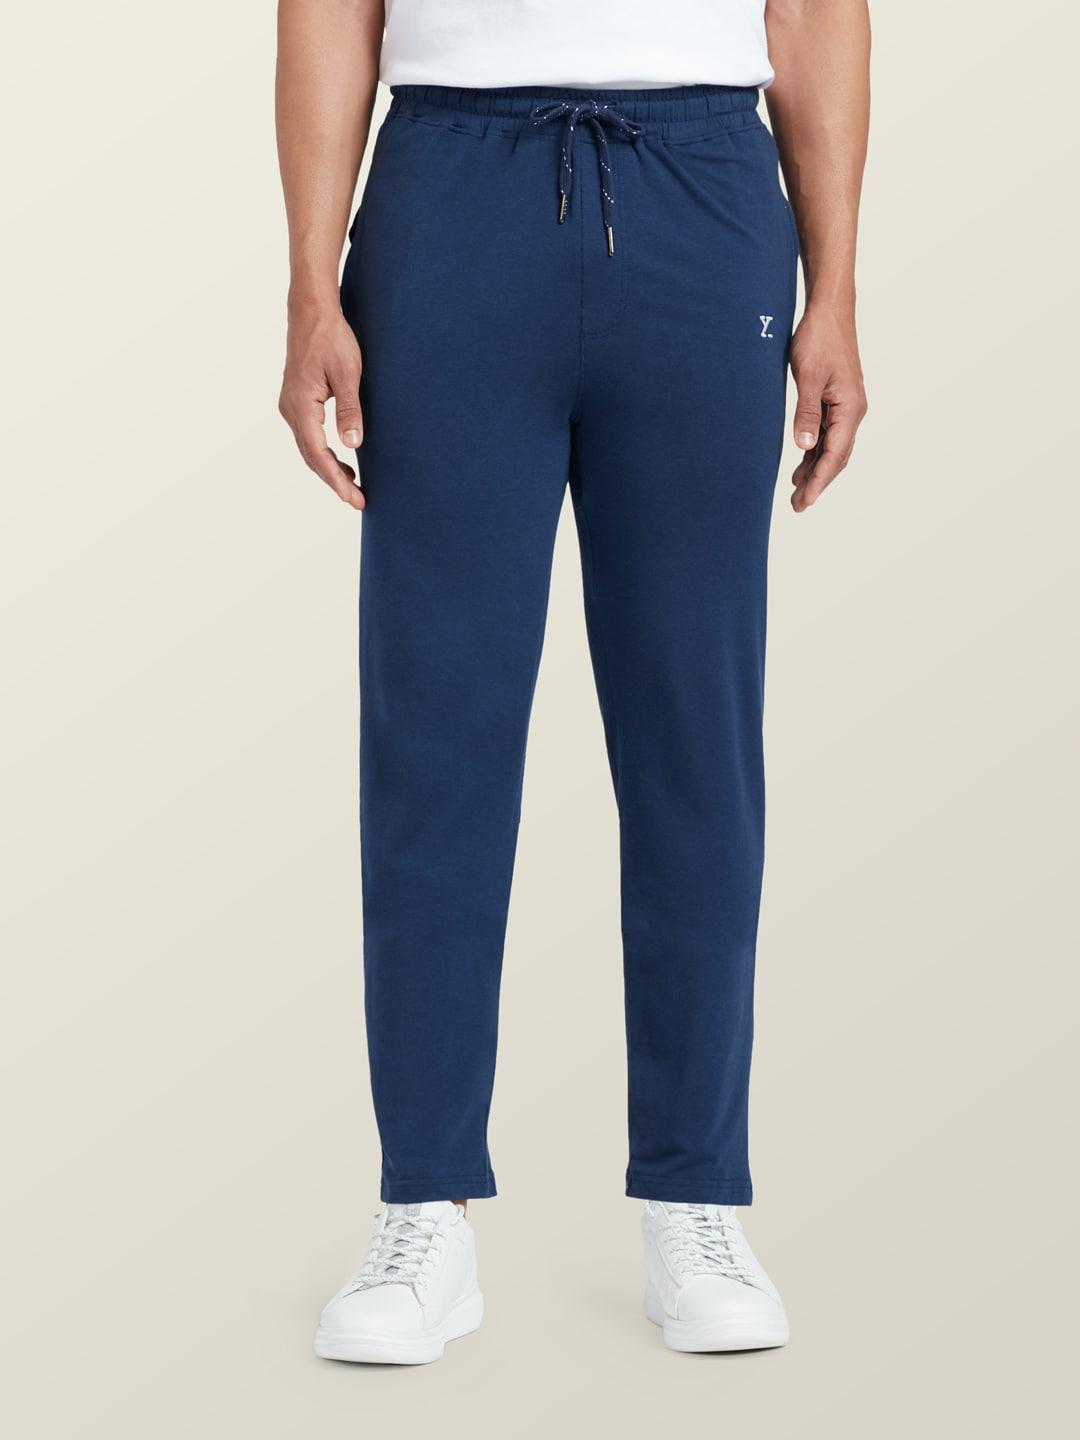 xyxx-men-blue-solid-antimicrobial-cotton-modal-casual-lounge-pant-with-zipper-pocket